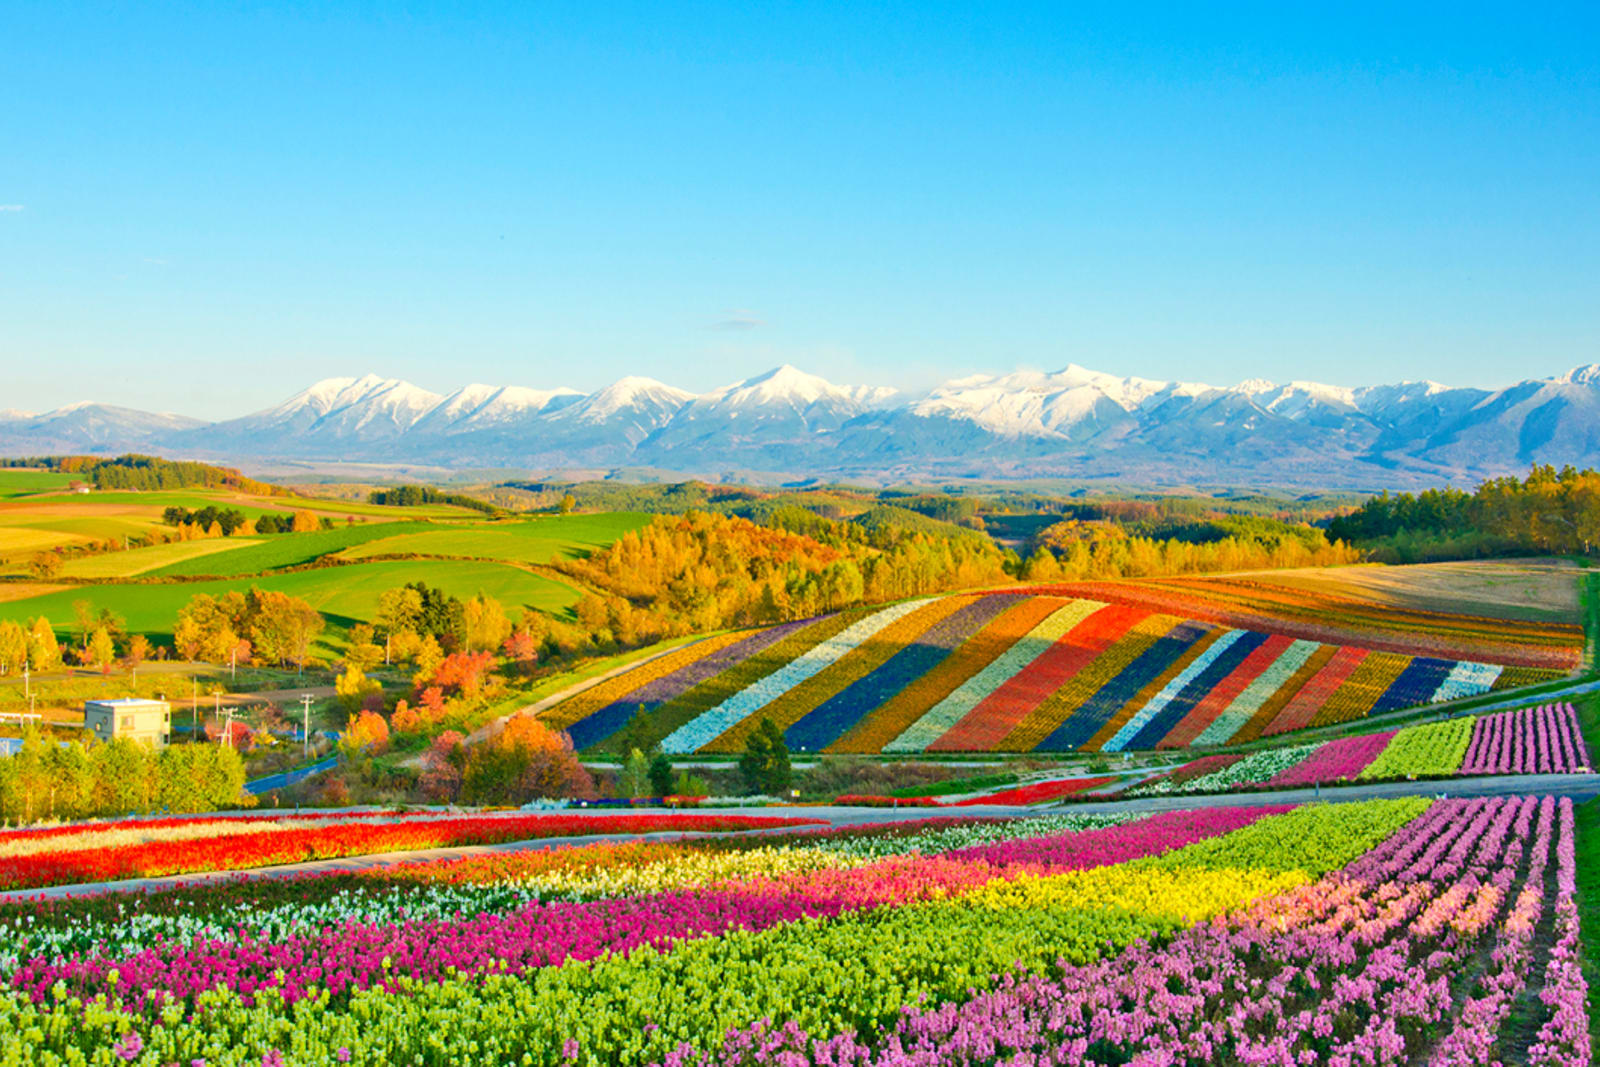 Japan's Patchwork Road was named for its quilt-like farmland